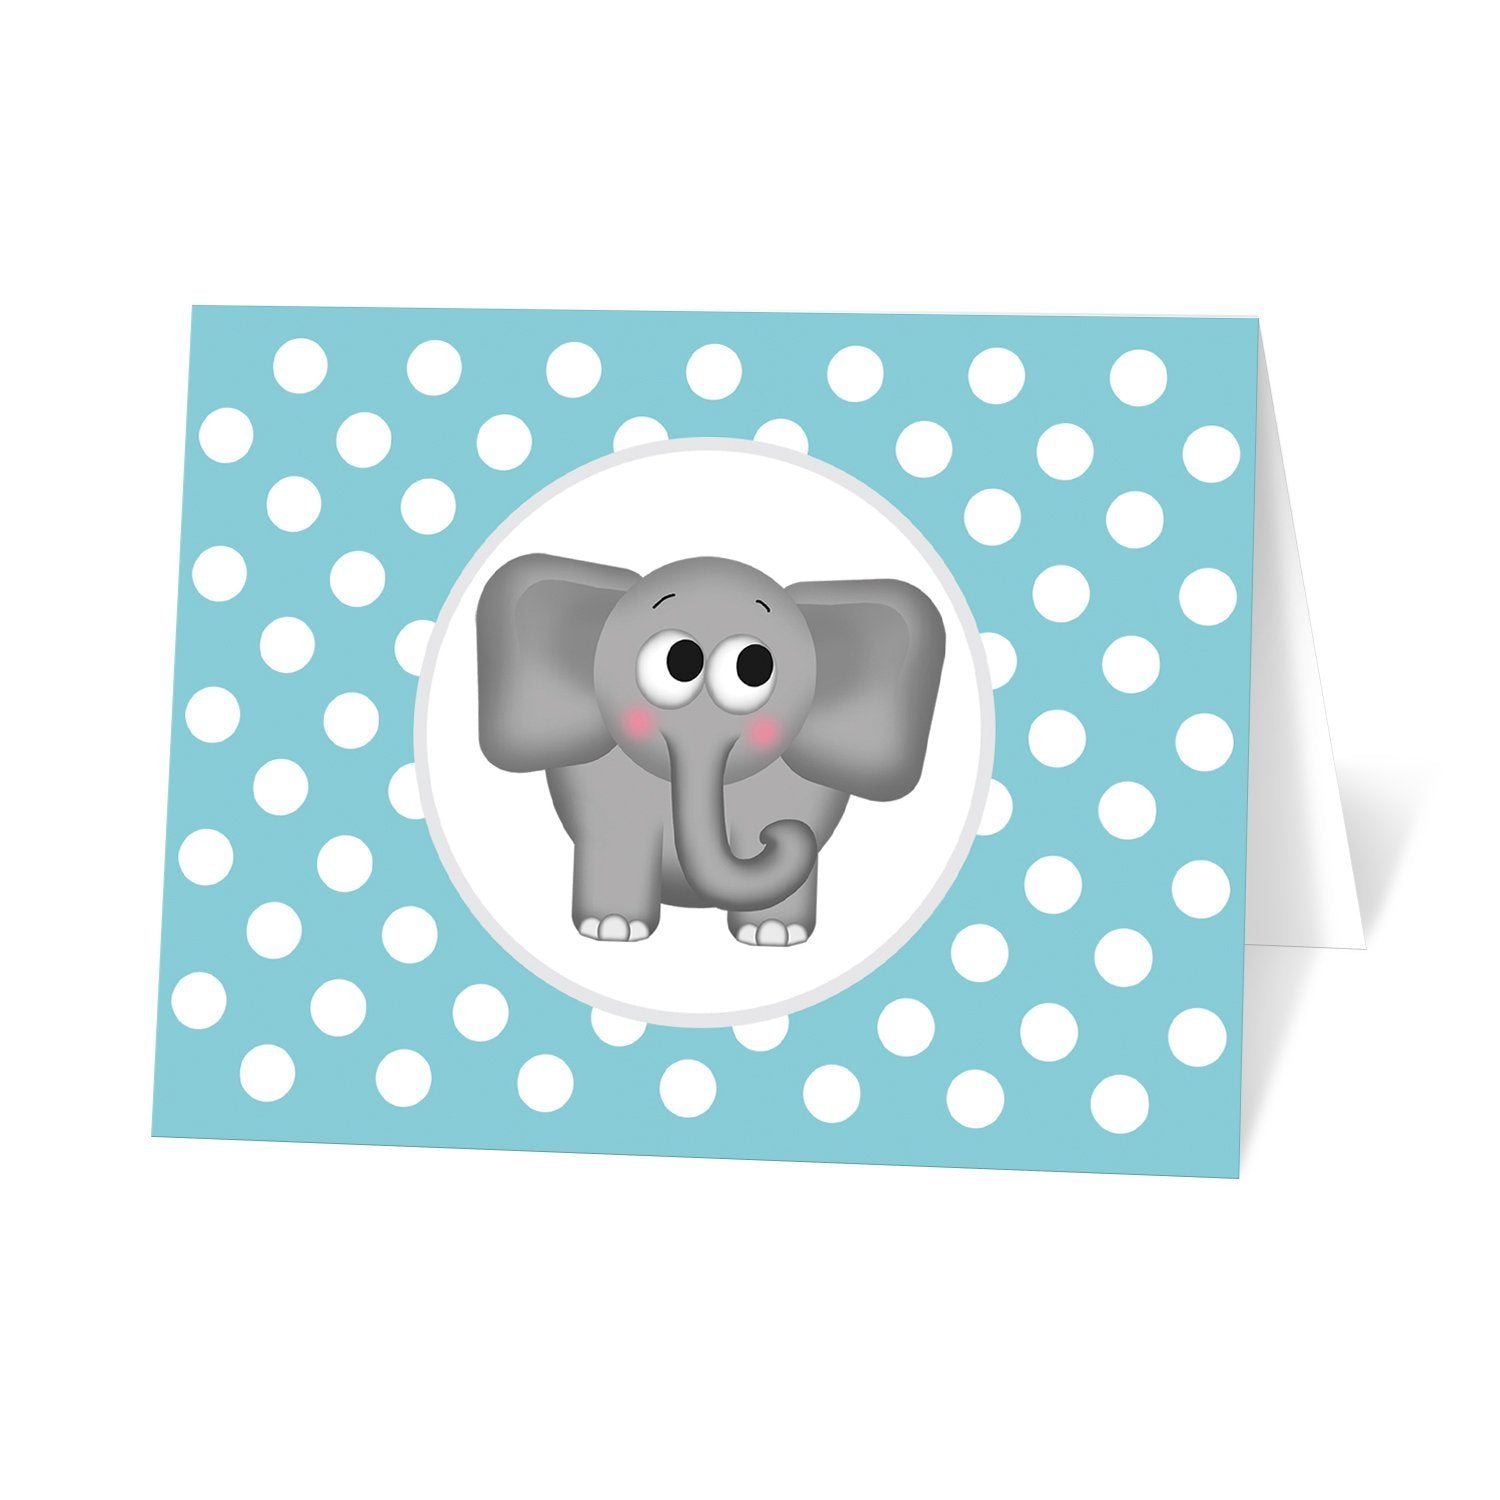 Cute Elephant Turquoise Polka Dot Note Cards at Artistically Invited